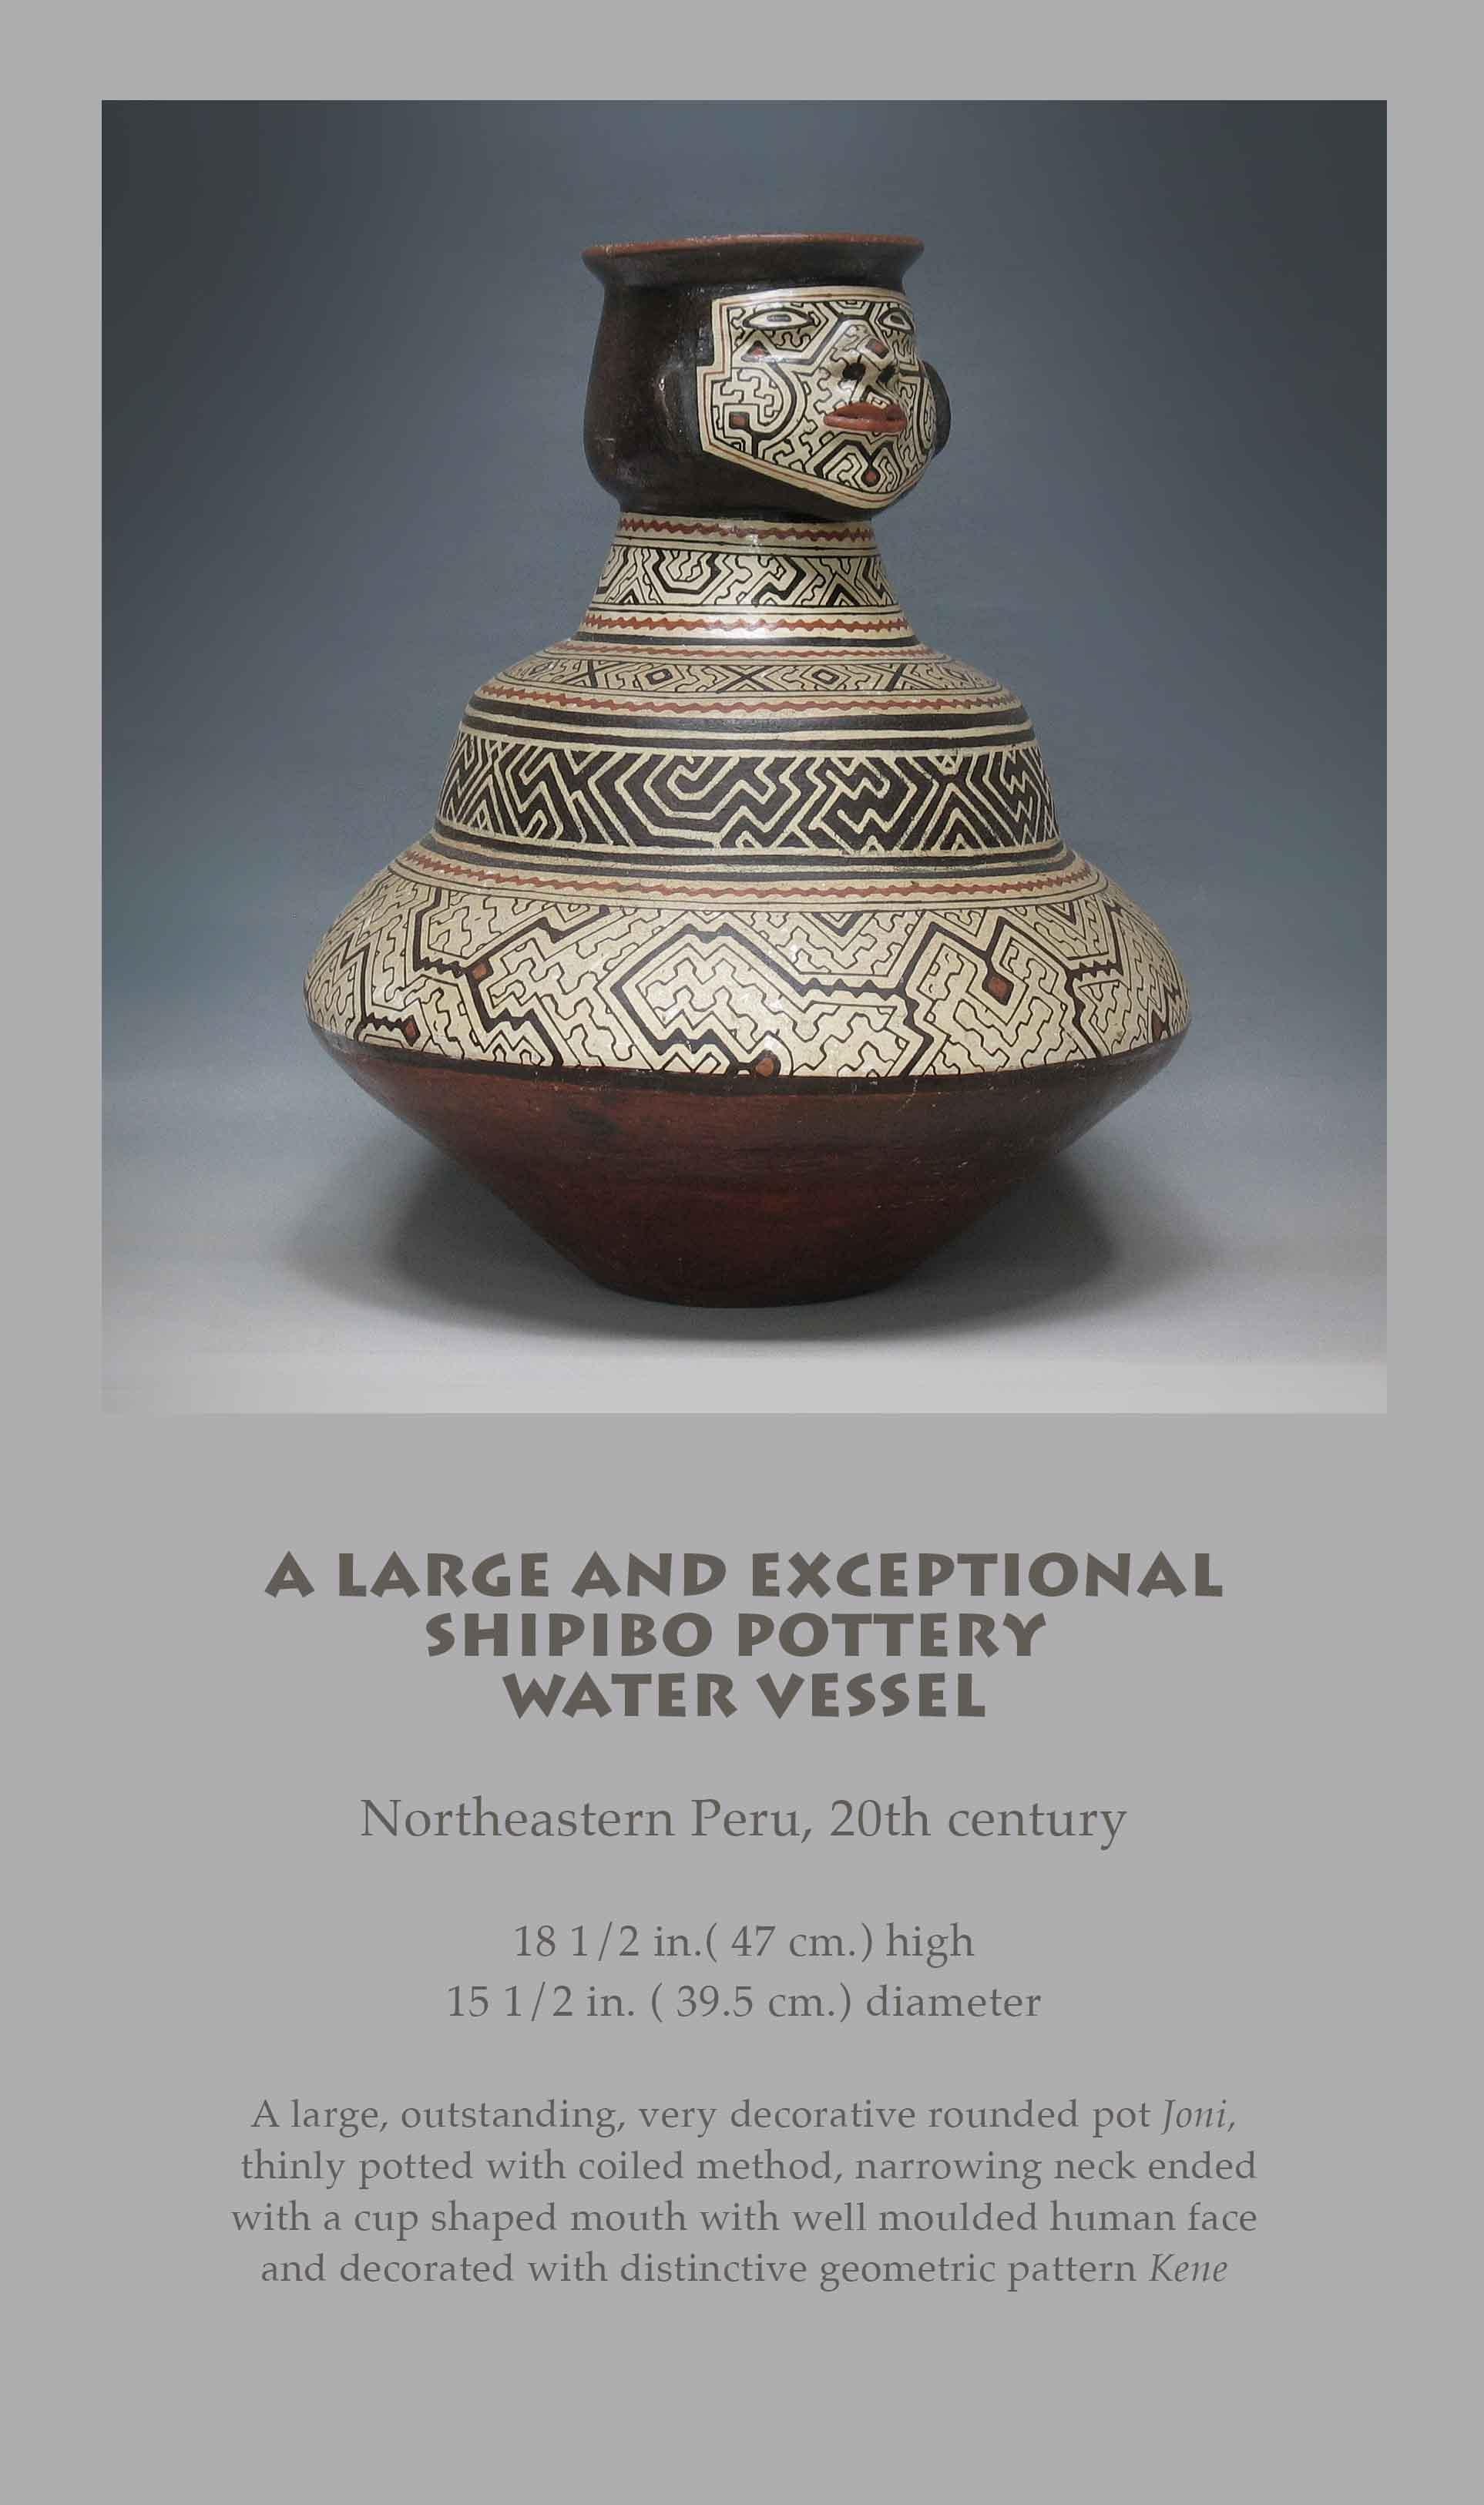 A LARGE AND EXCEPTIONAL
SHIPIBO POTTERY WATER VESSEL

Northeastern Peru, 20th Century. 

18 1/2